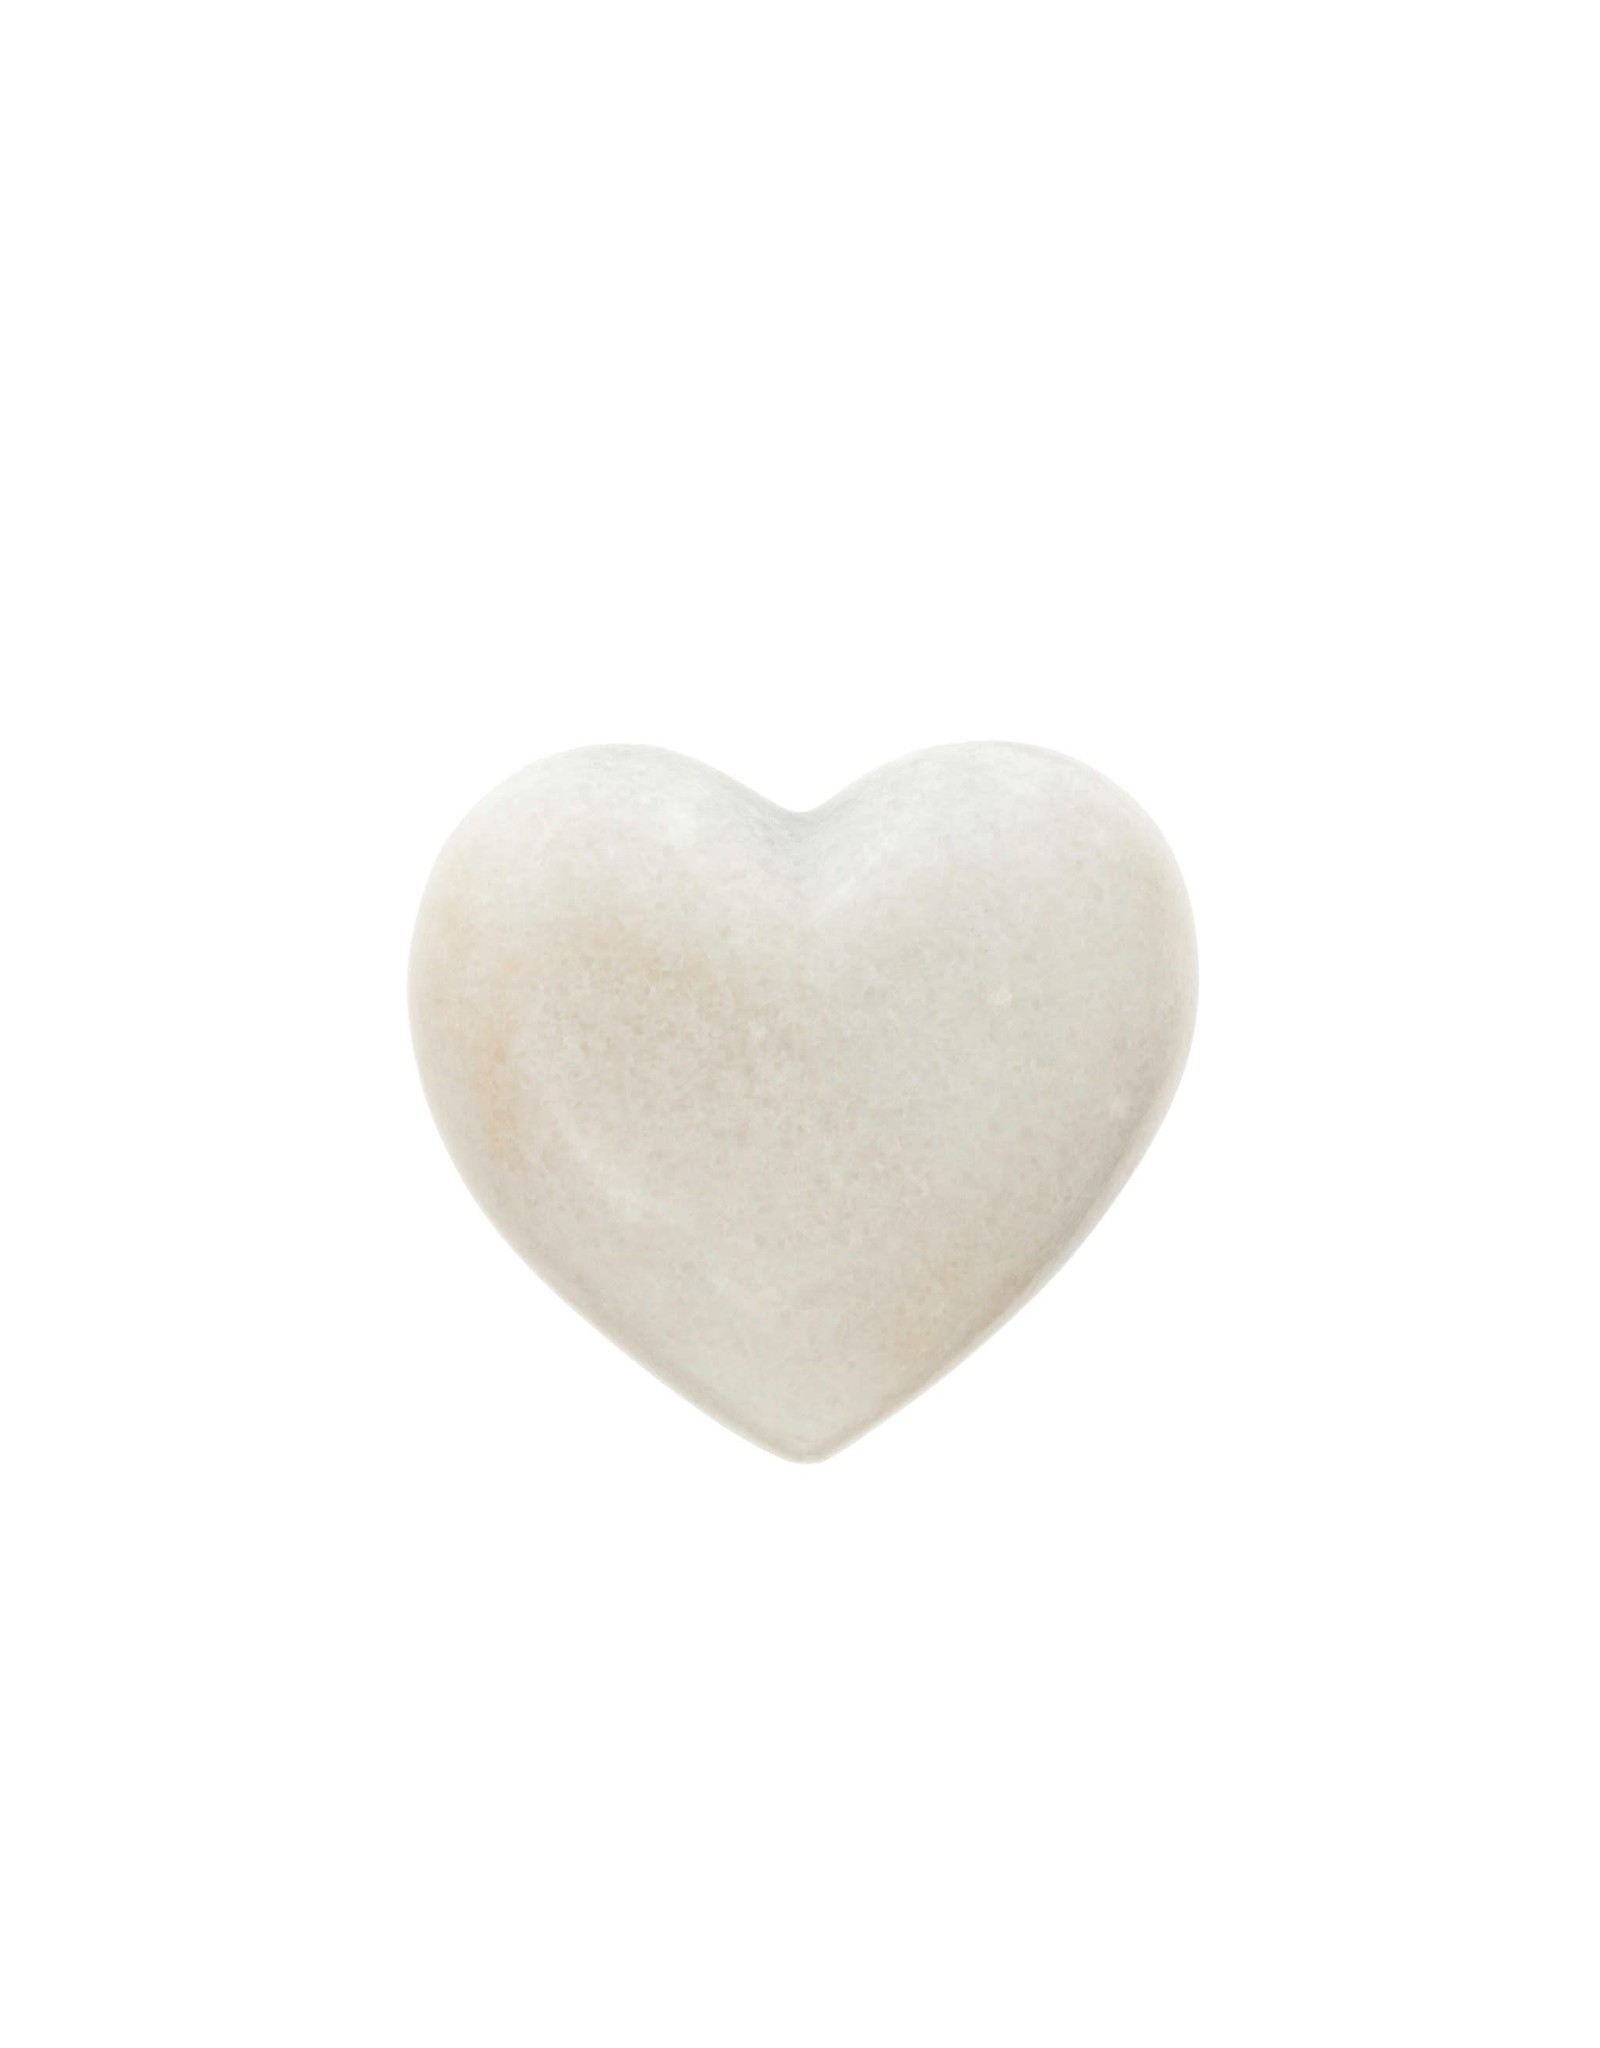 White Marble Heart - Small